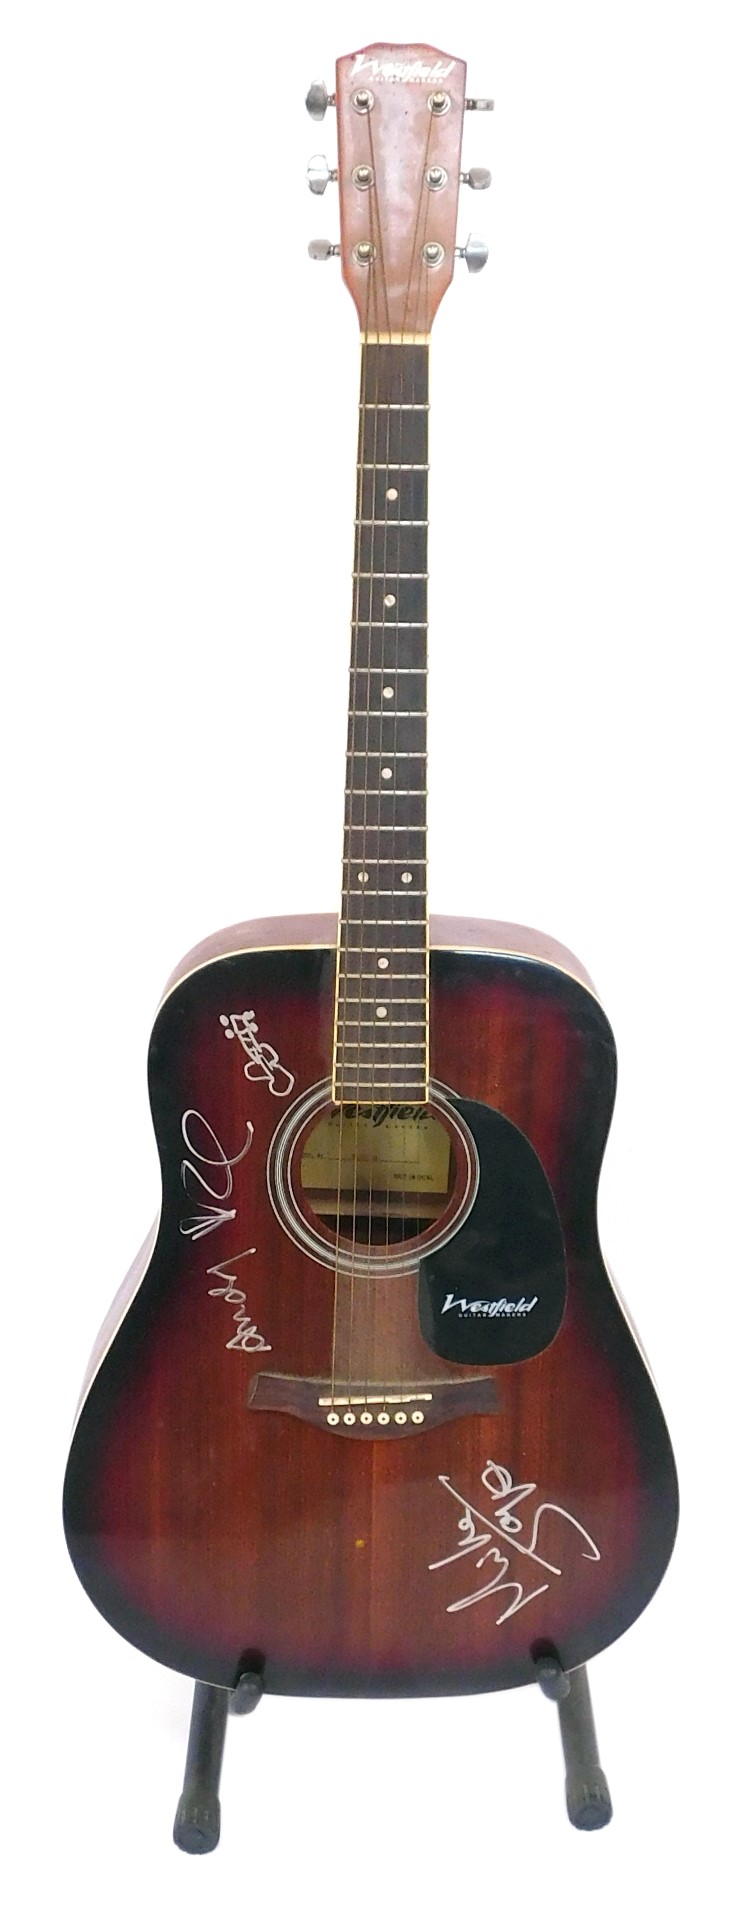 A Westfield guitar, model B200-SB, on guitar stand, with silver marker signatures relating to The Sm